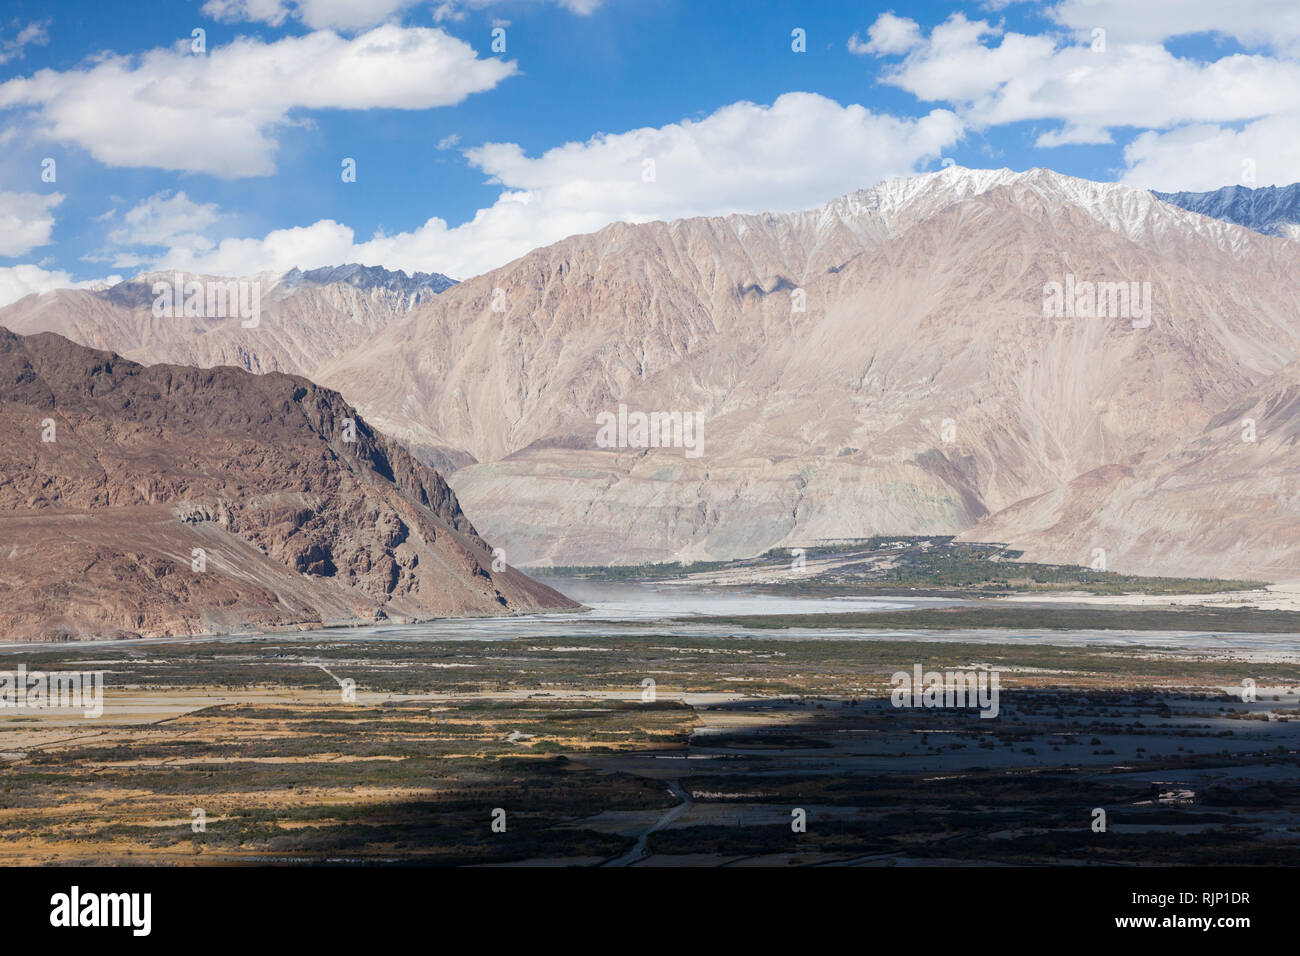 Landscape of Nubra Valley seen from Diskit Gompa (also known as Deskit Gompa), Ladakh, Jammu and Kashmir, India Stock Photo